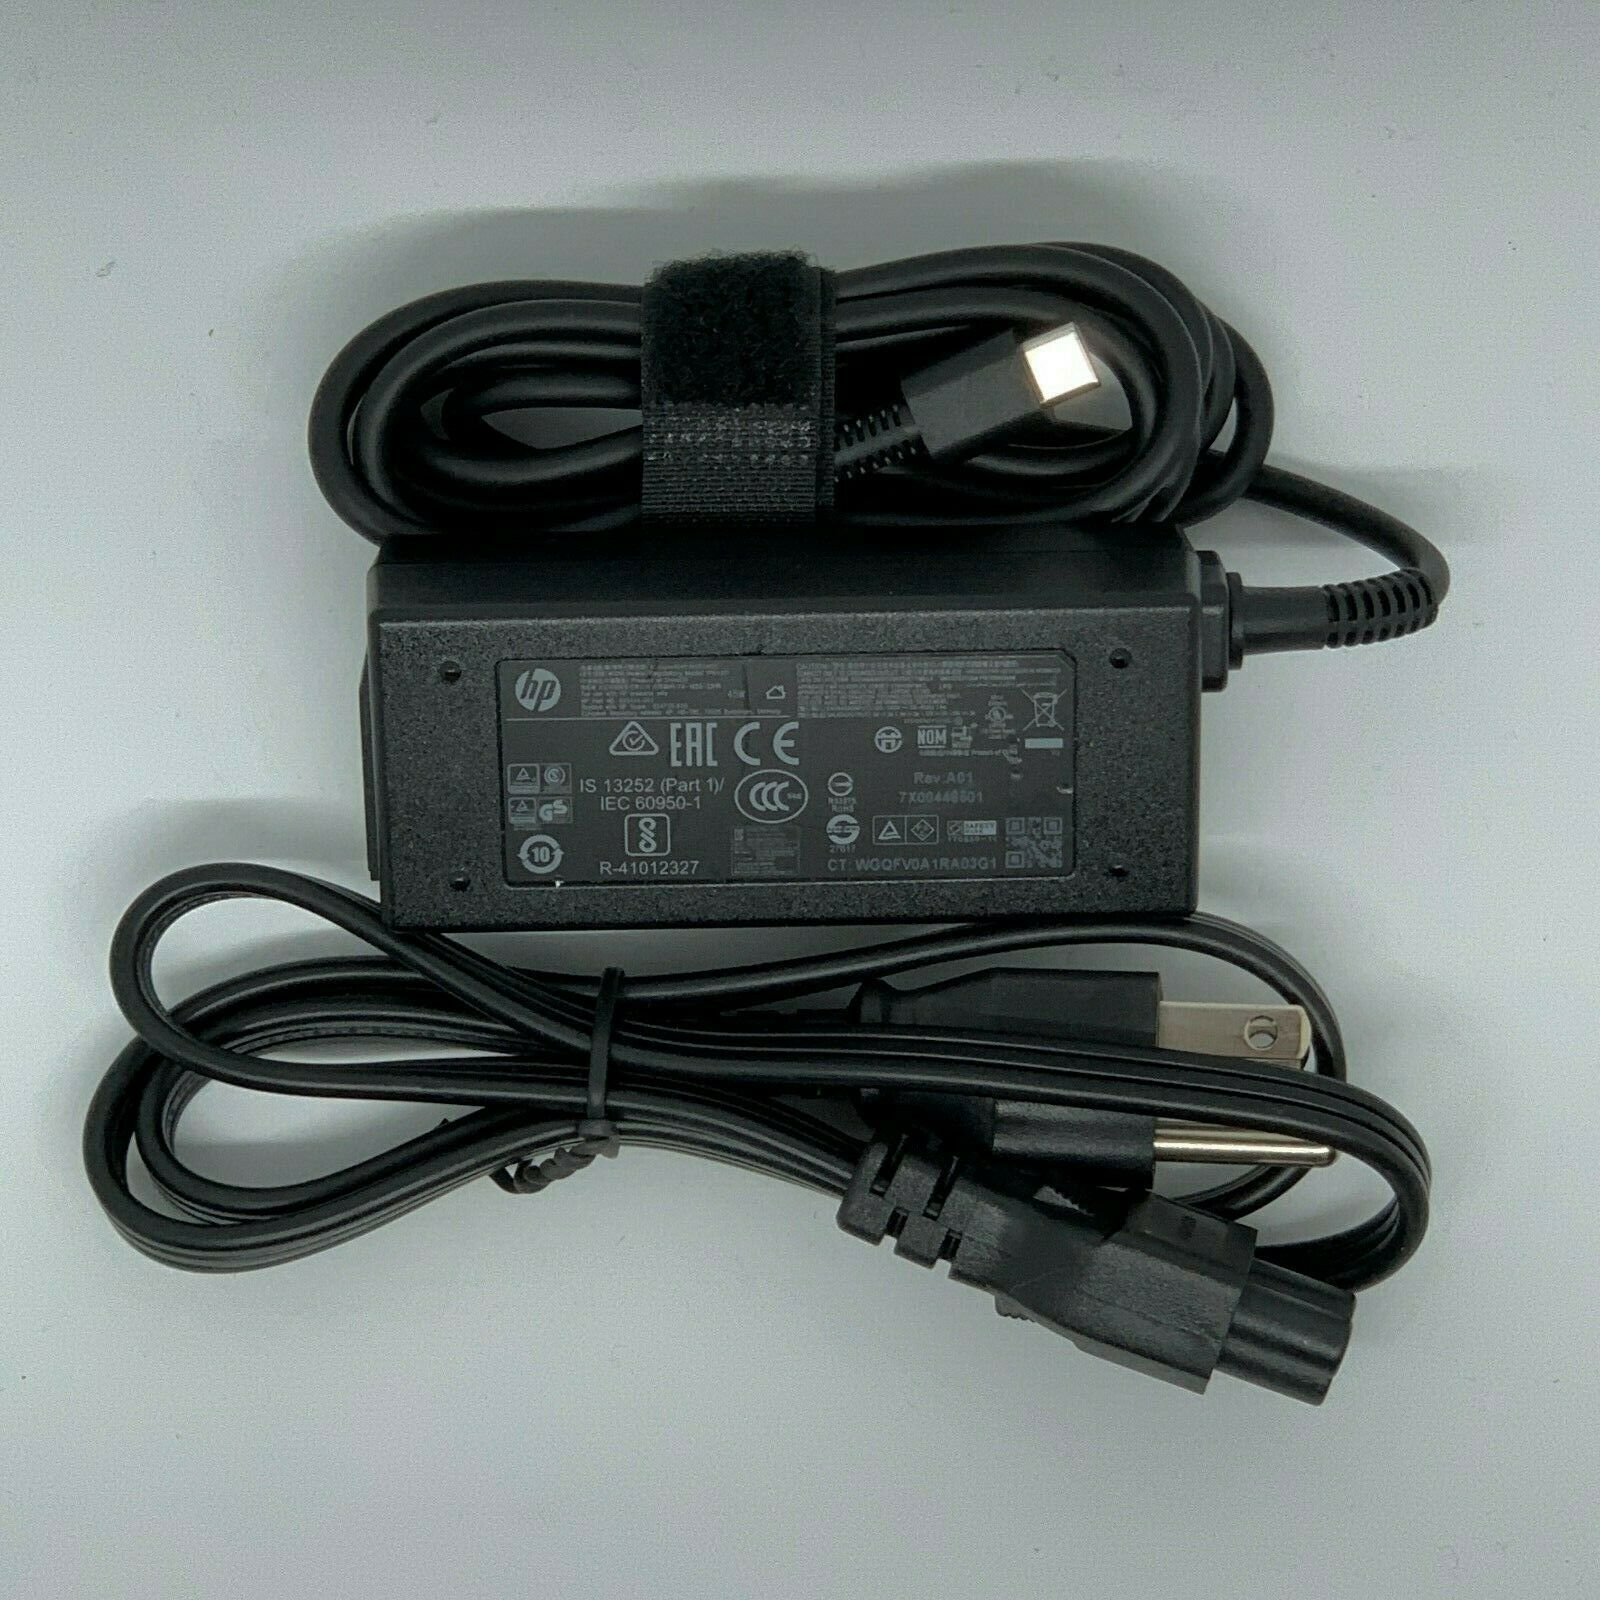 HP ELITE X2 1012 G1 TABLET 45w Charger AC Power Adapter NEW Genuine Country/Region of Manufacture: China Compatible Br - Click Image to Close